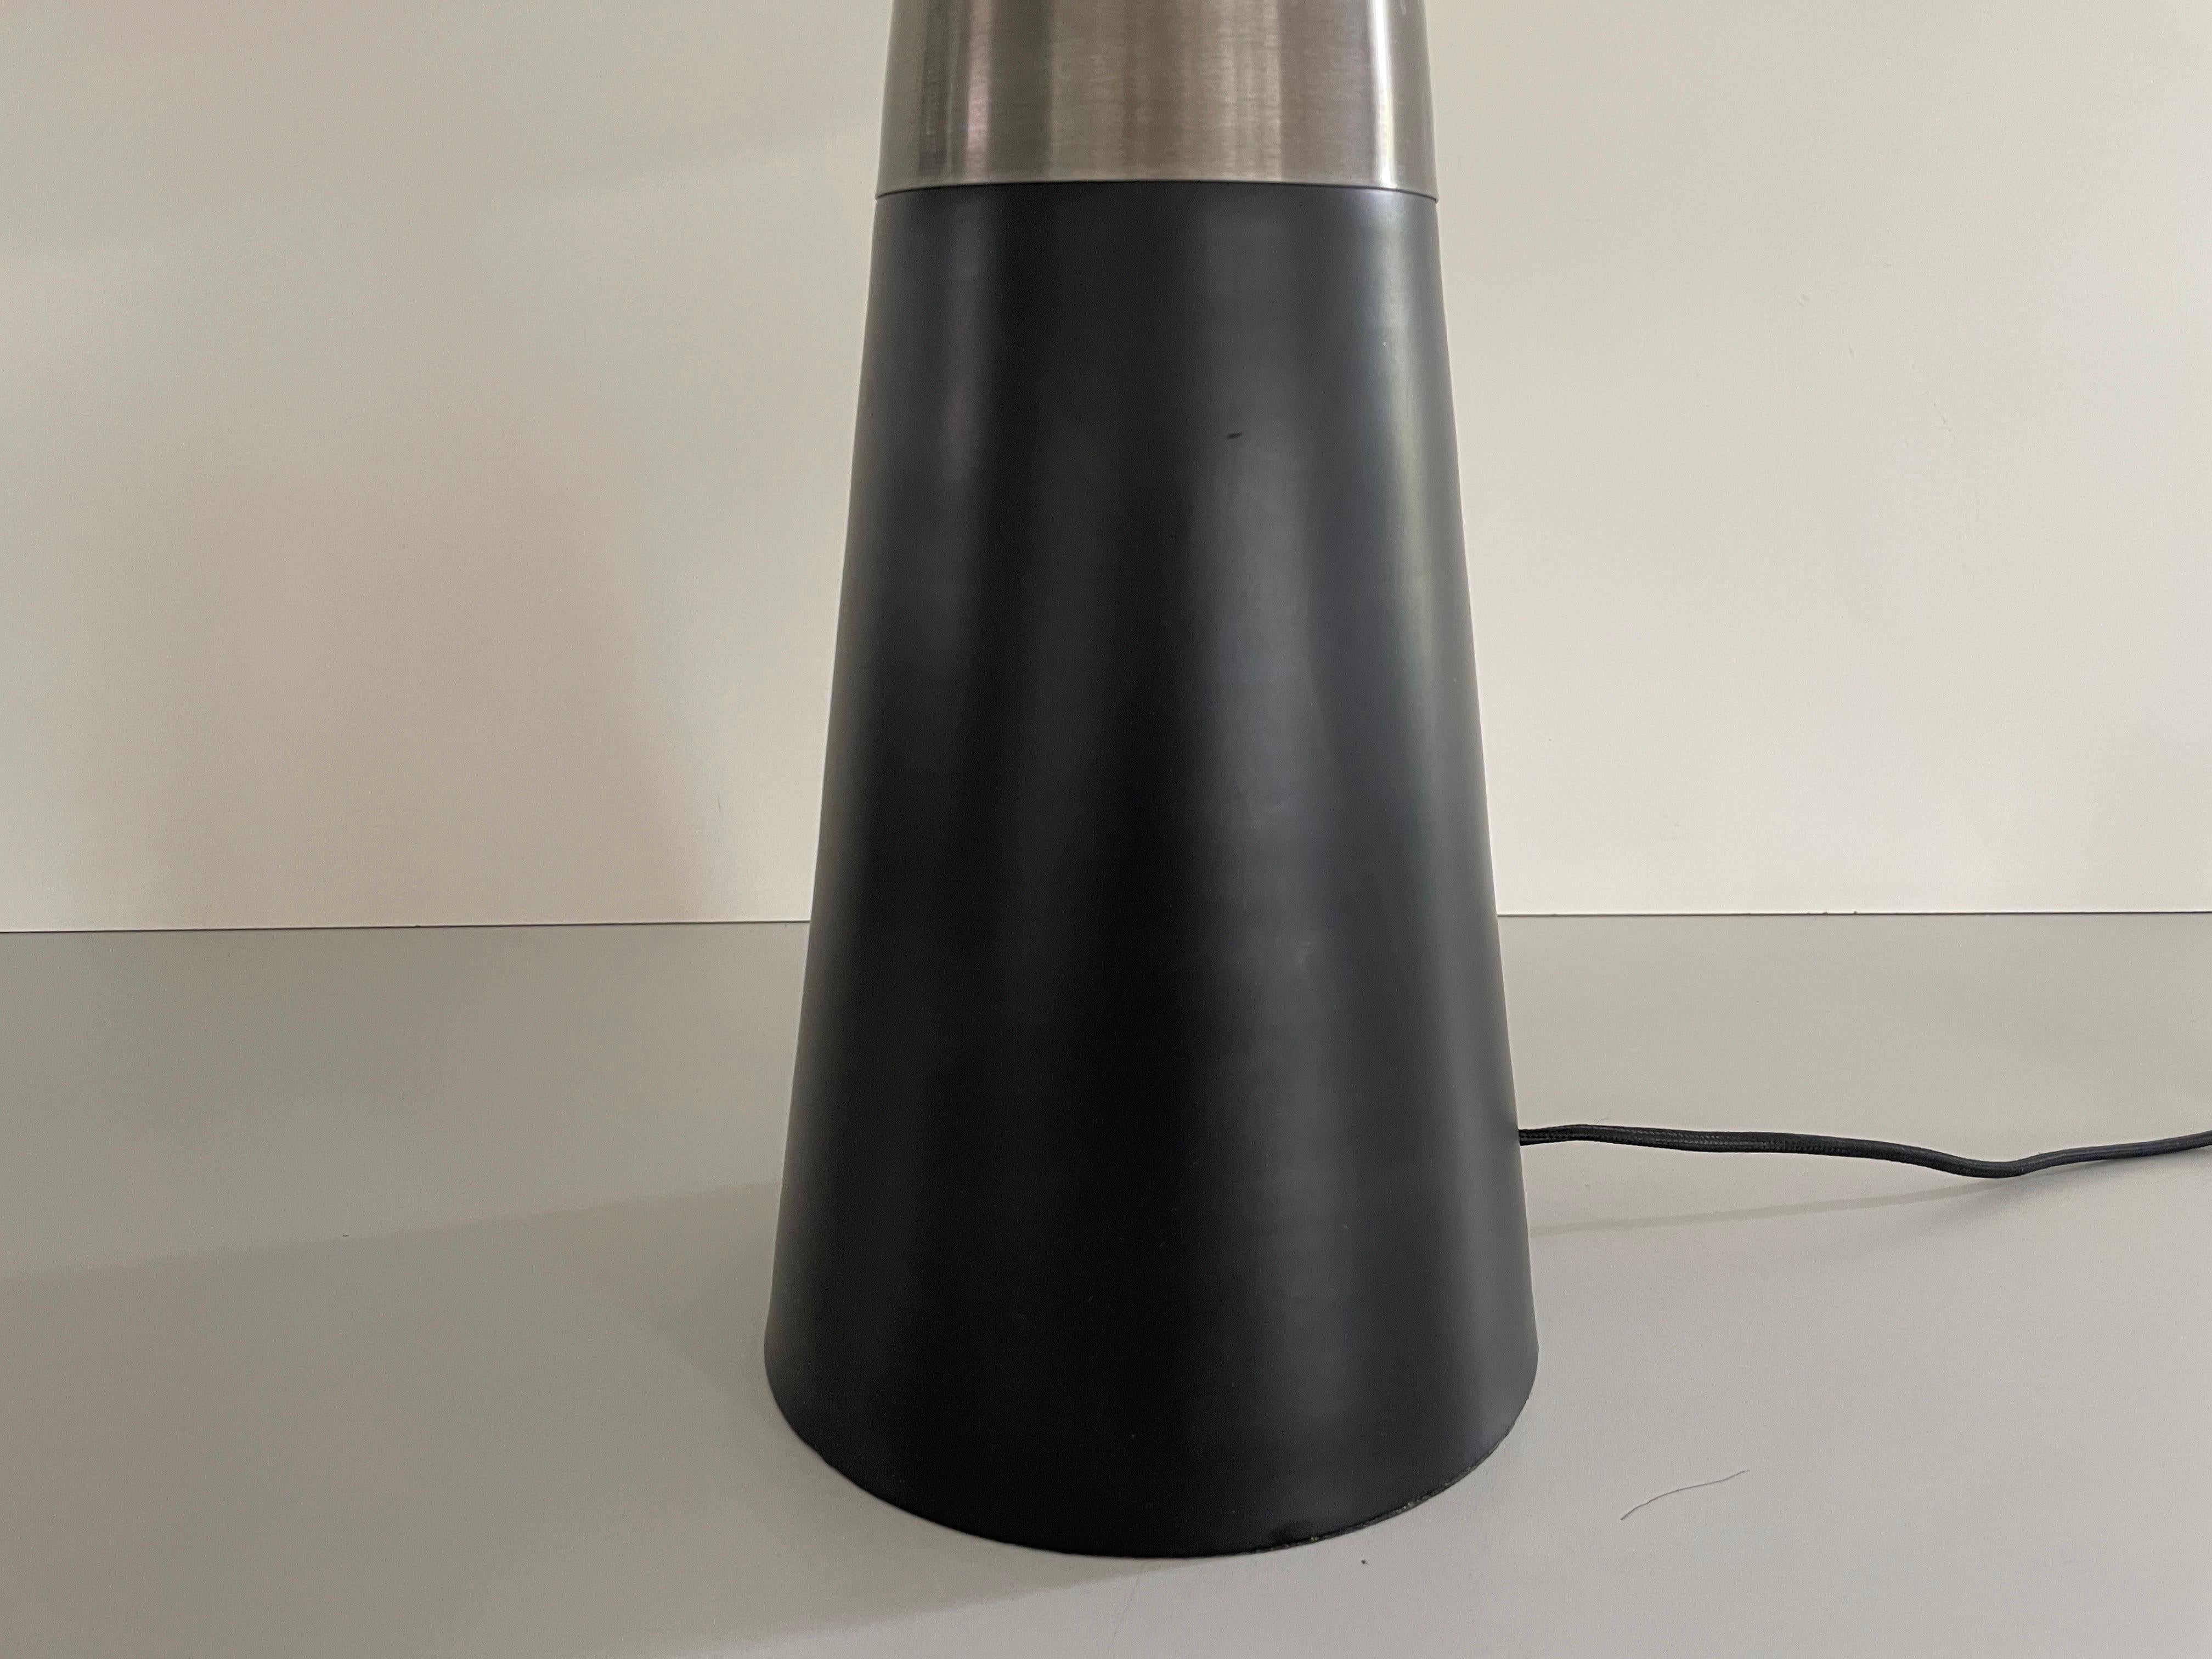 Muschroom and Conic Design Large Table Lamp by LAMBERT, 1980s, Germany For Sale 3